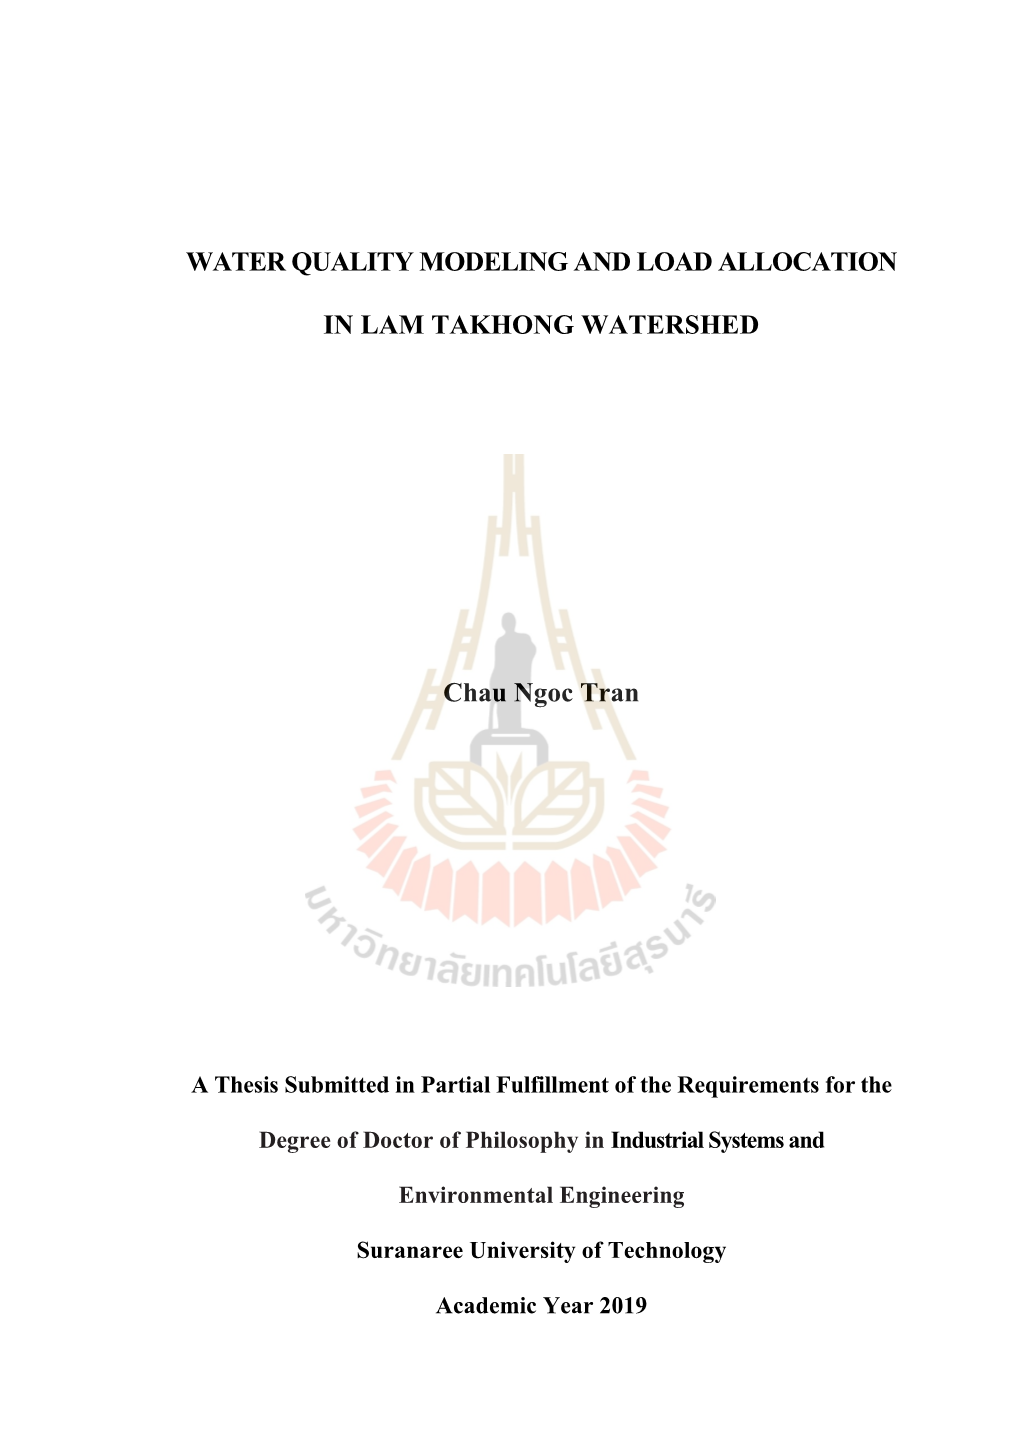 Water Quality Modeling and Load Allocation in Lam